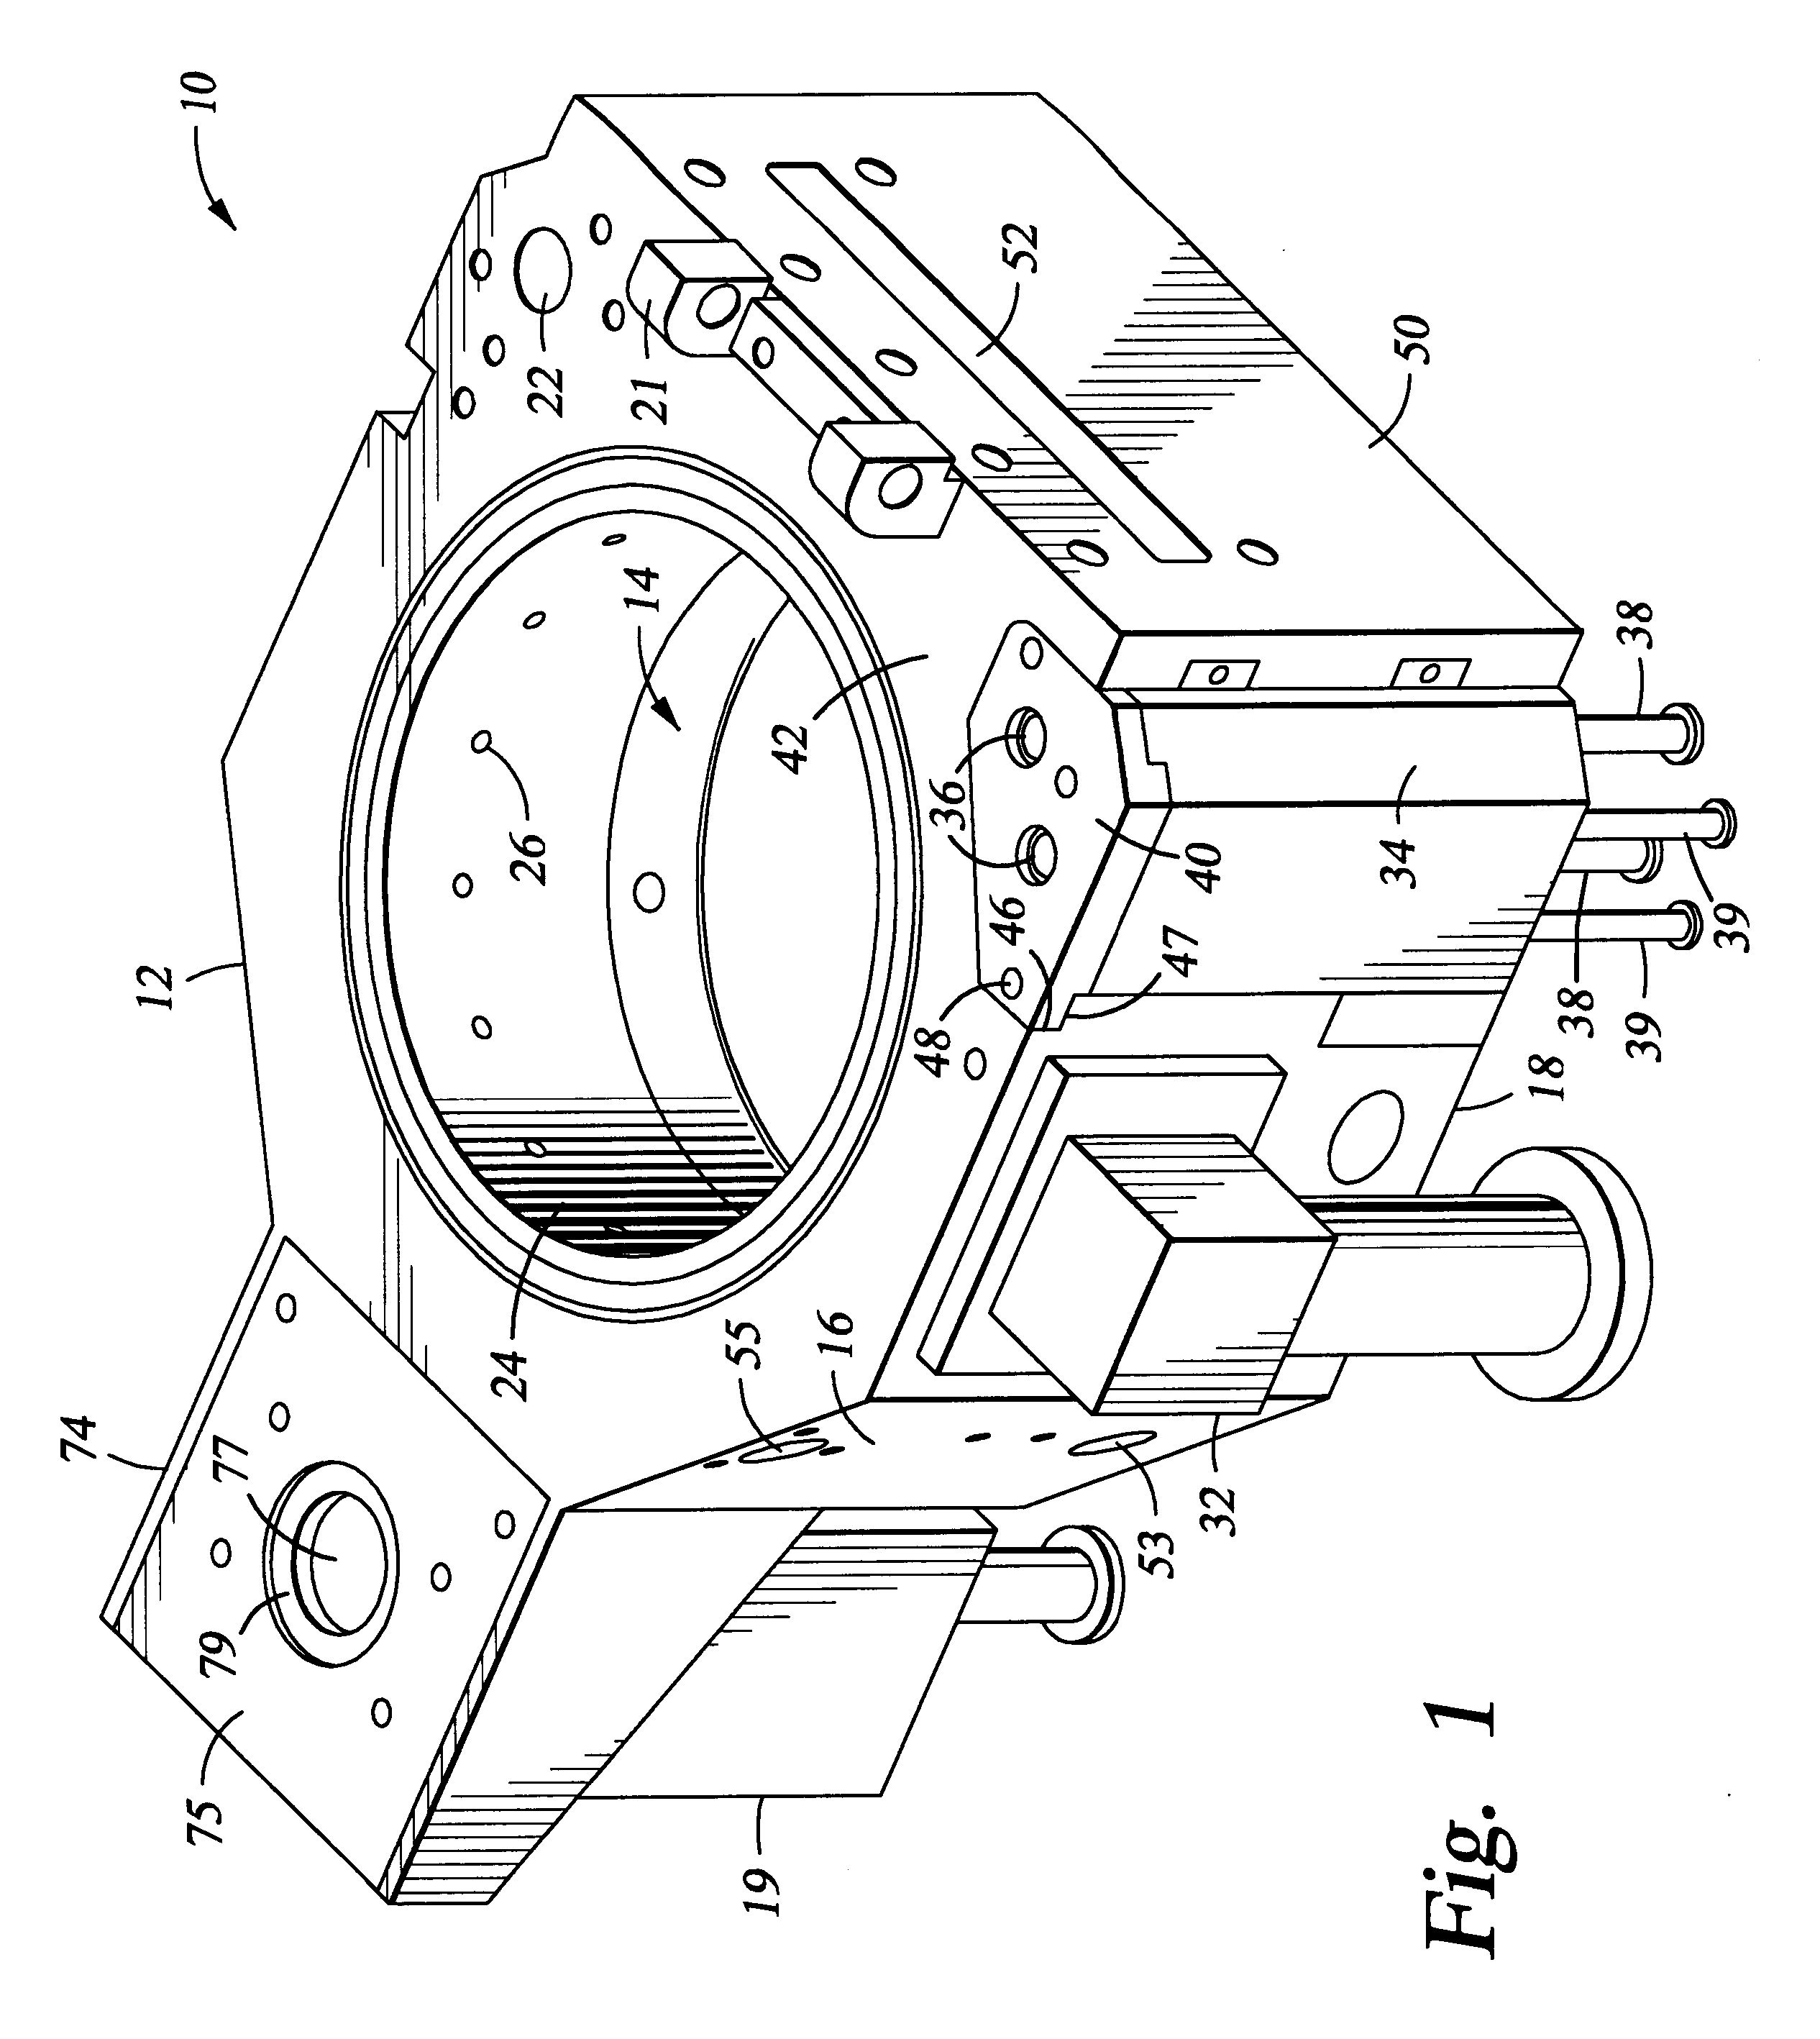 Apparatus and method for depositing low K dielectric materials